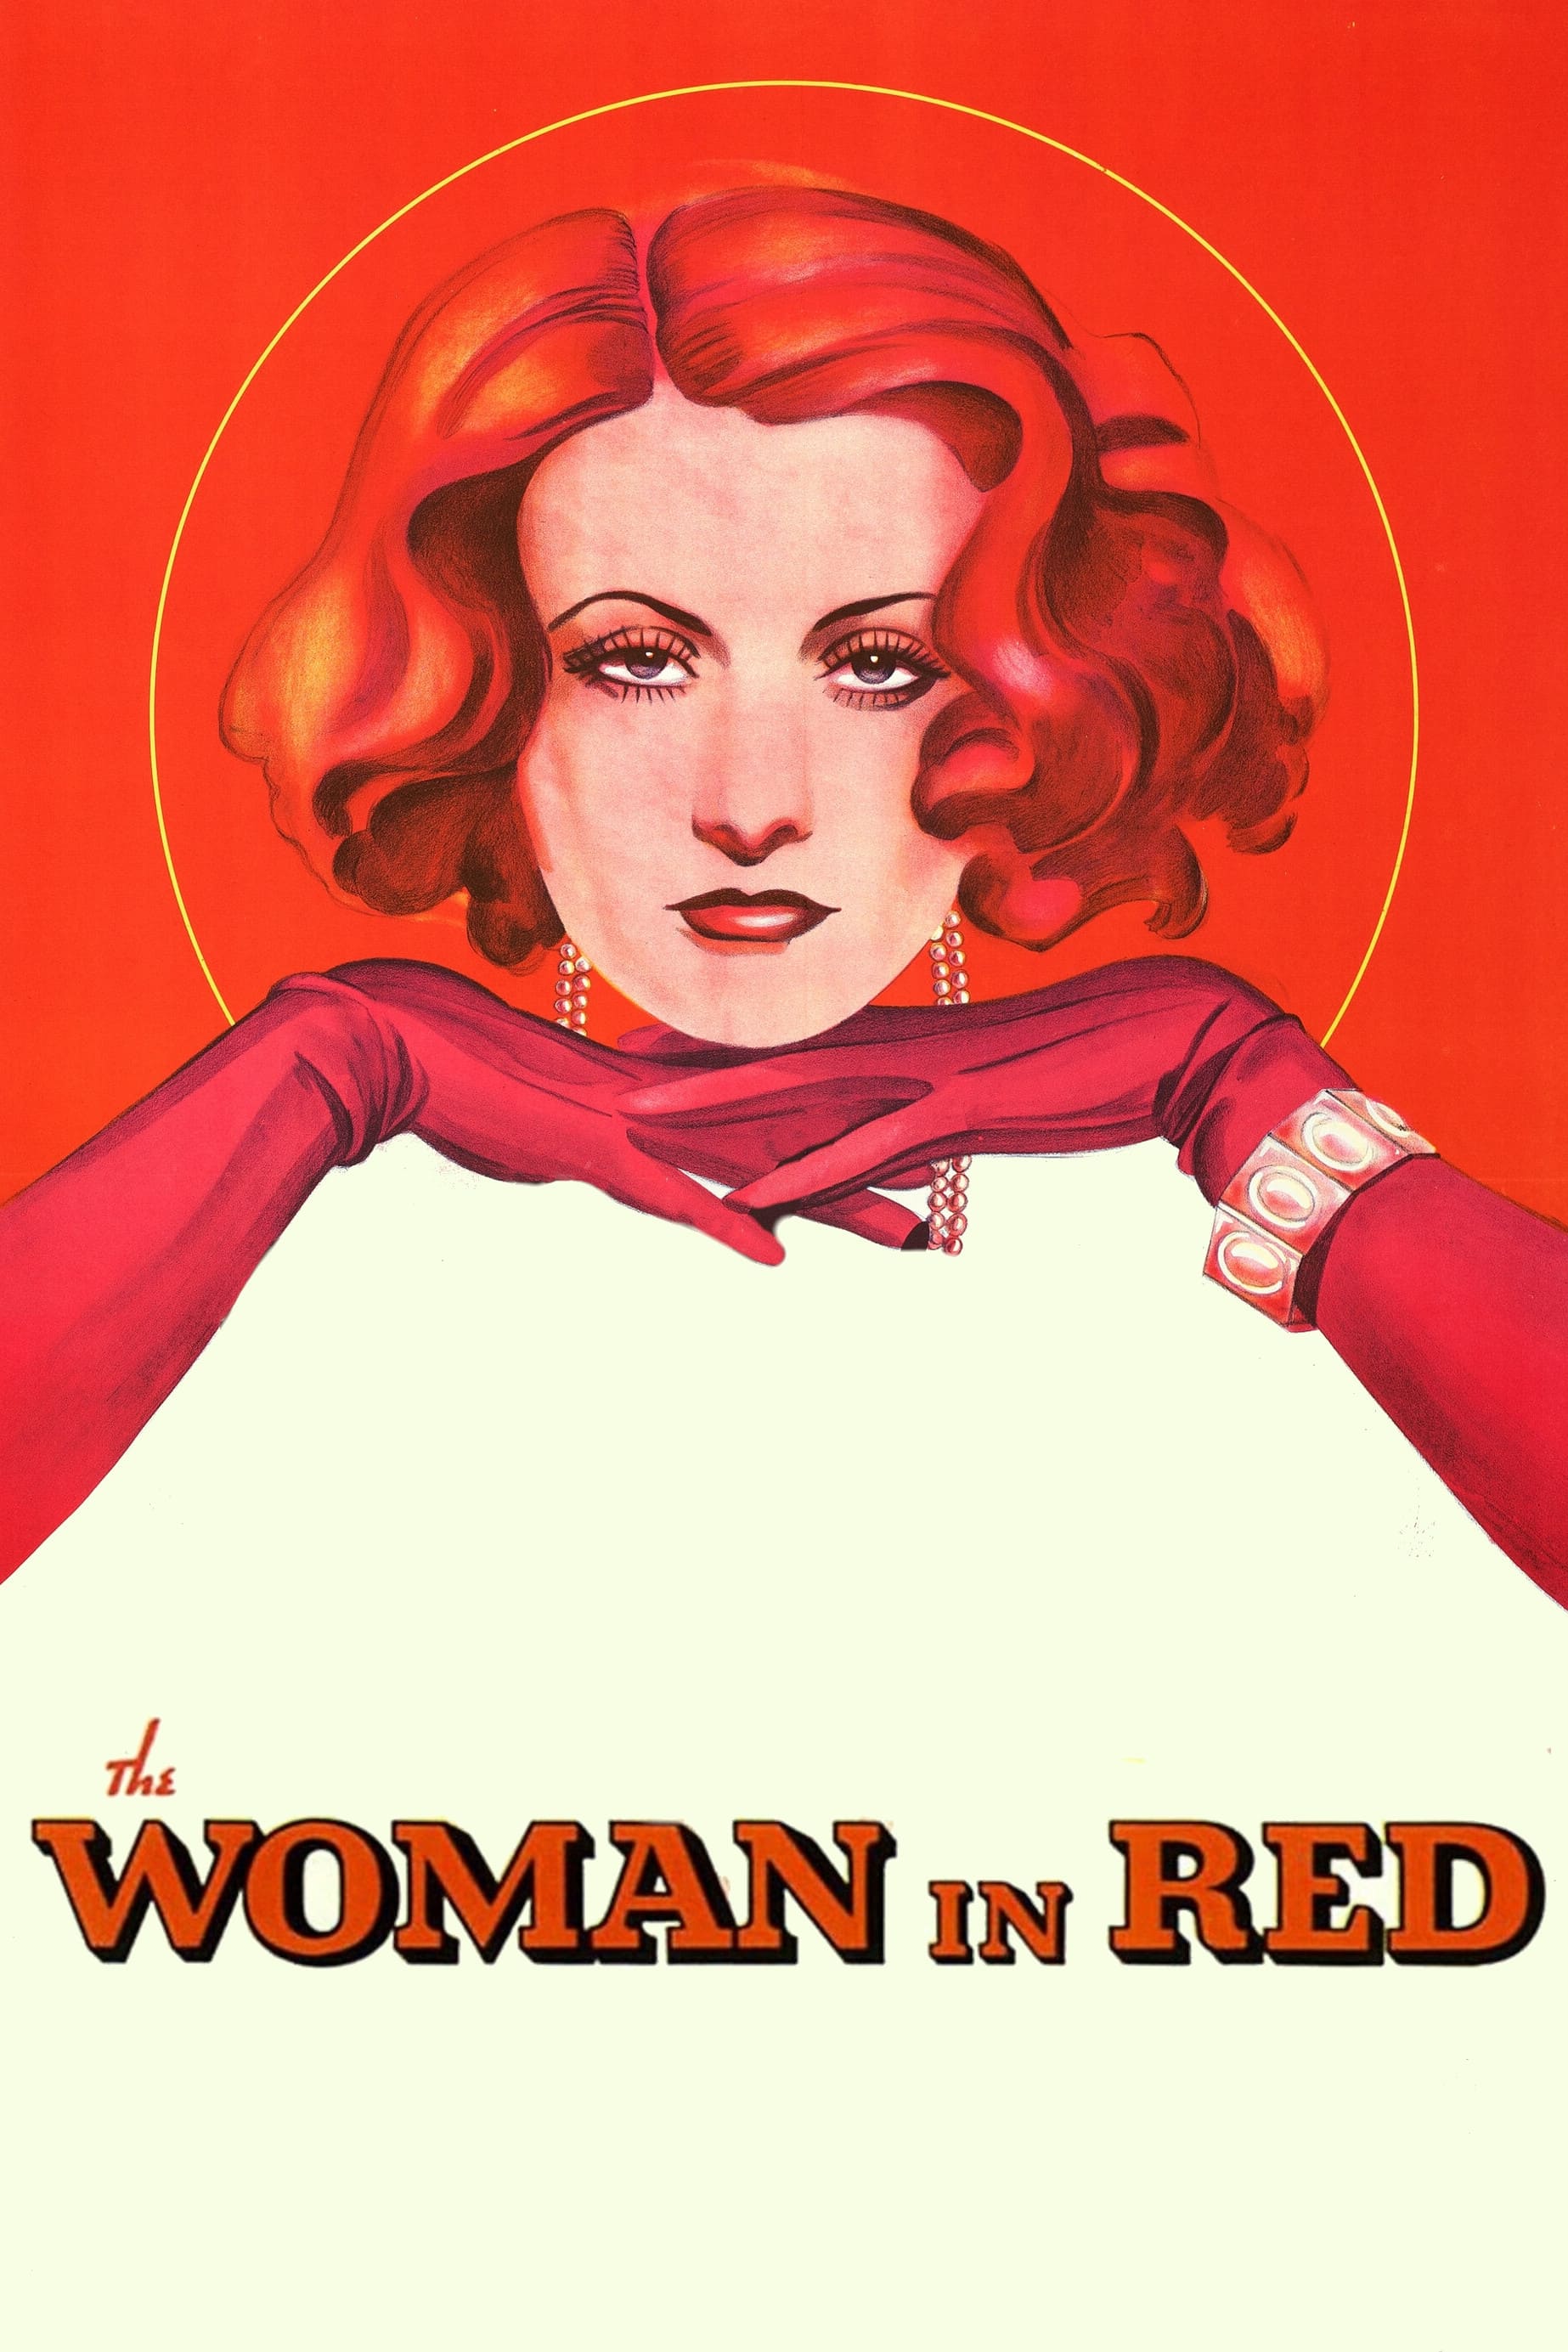 The Woman in Red (1935)